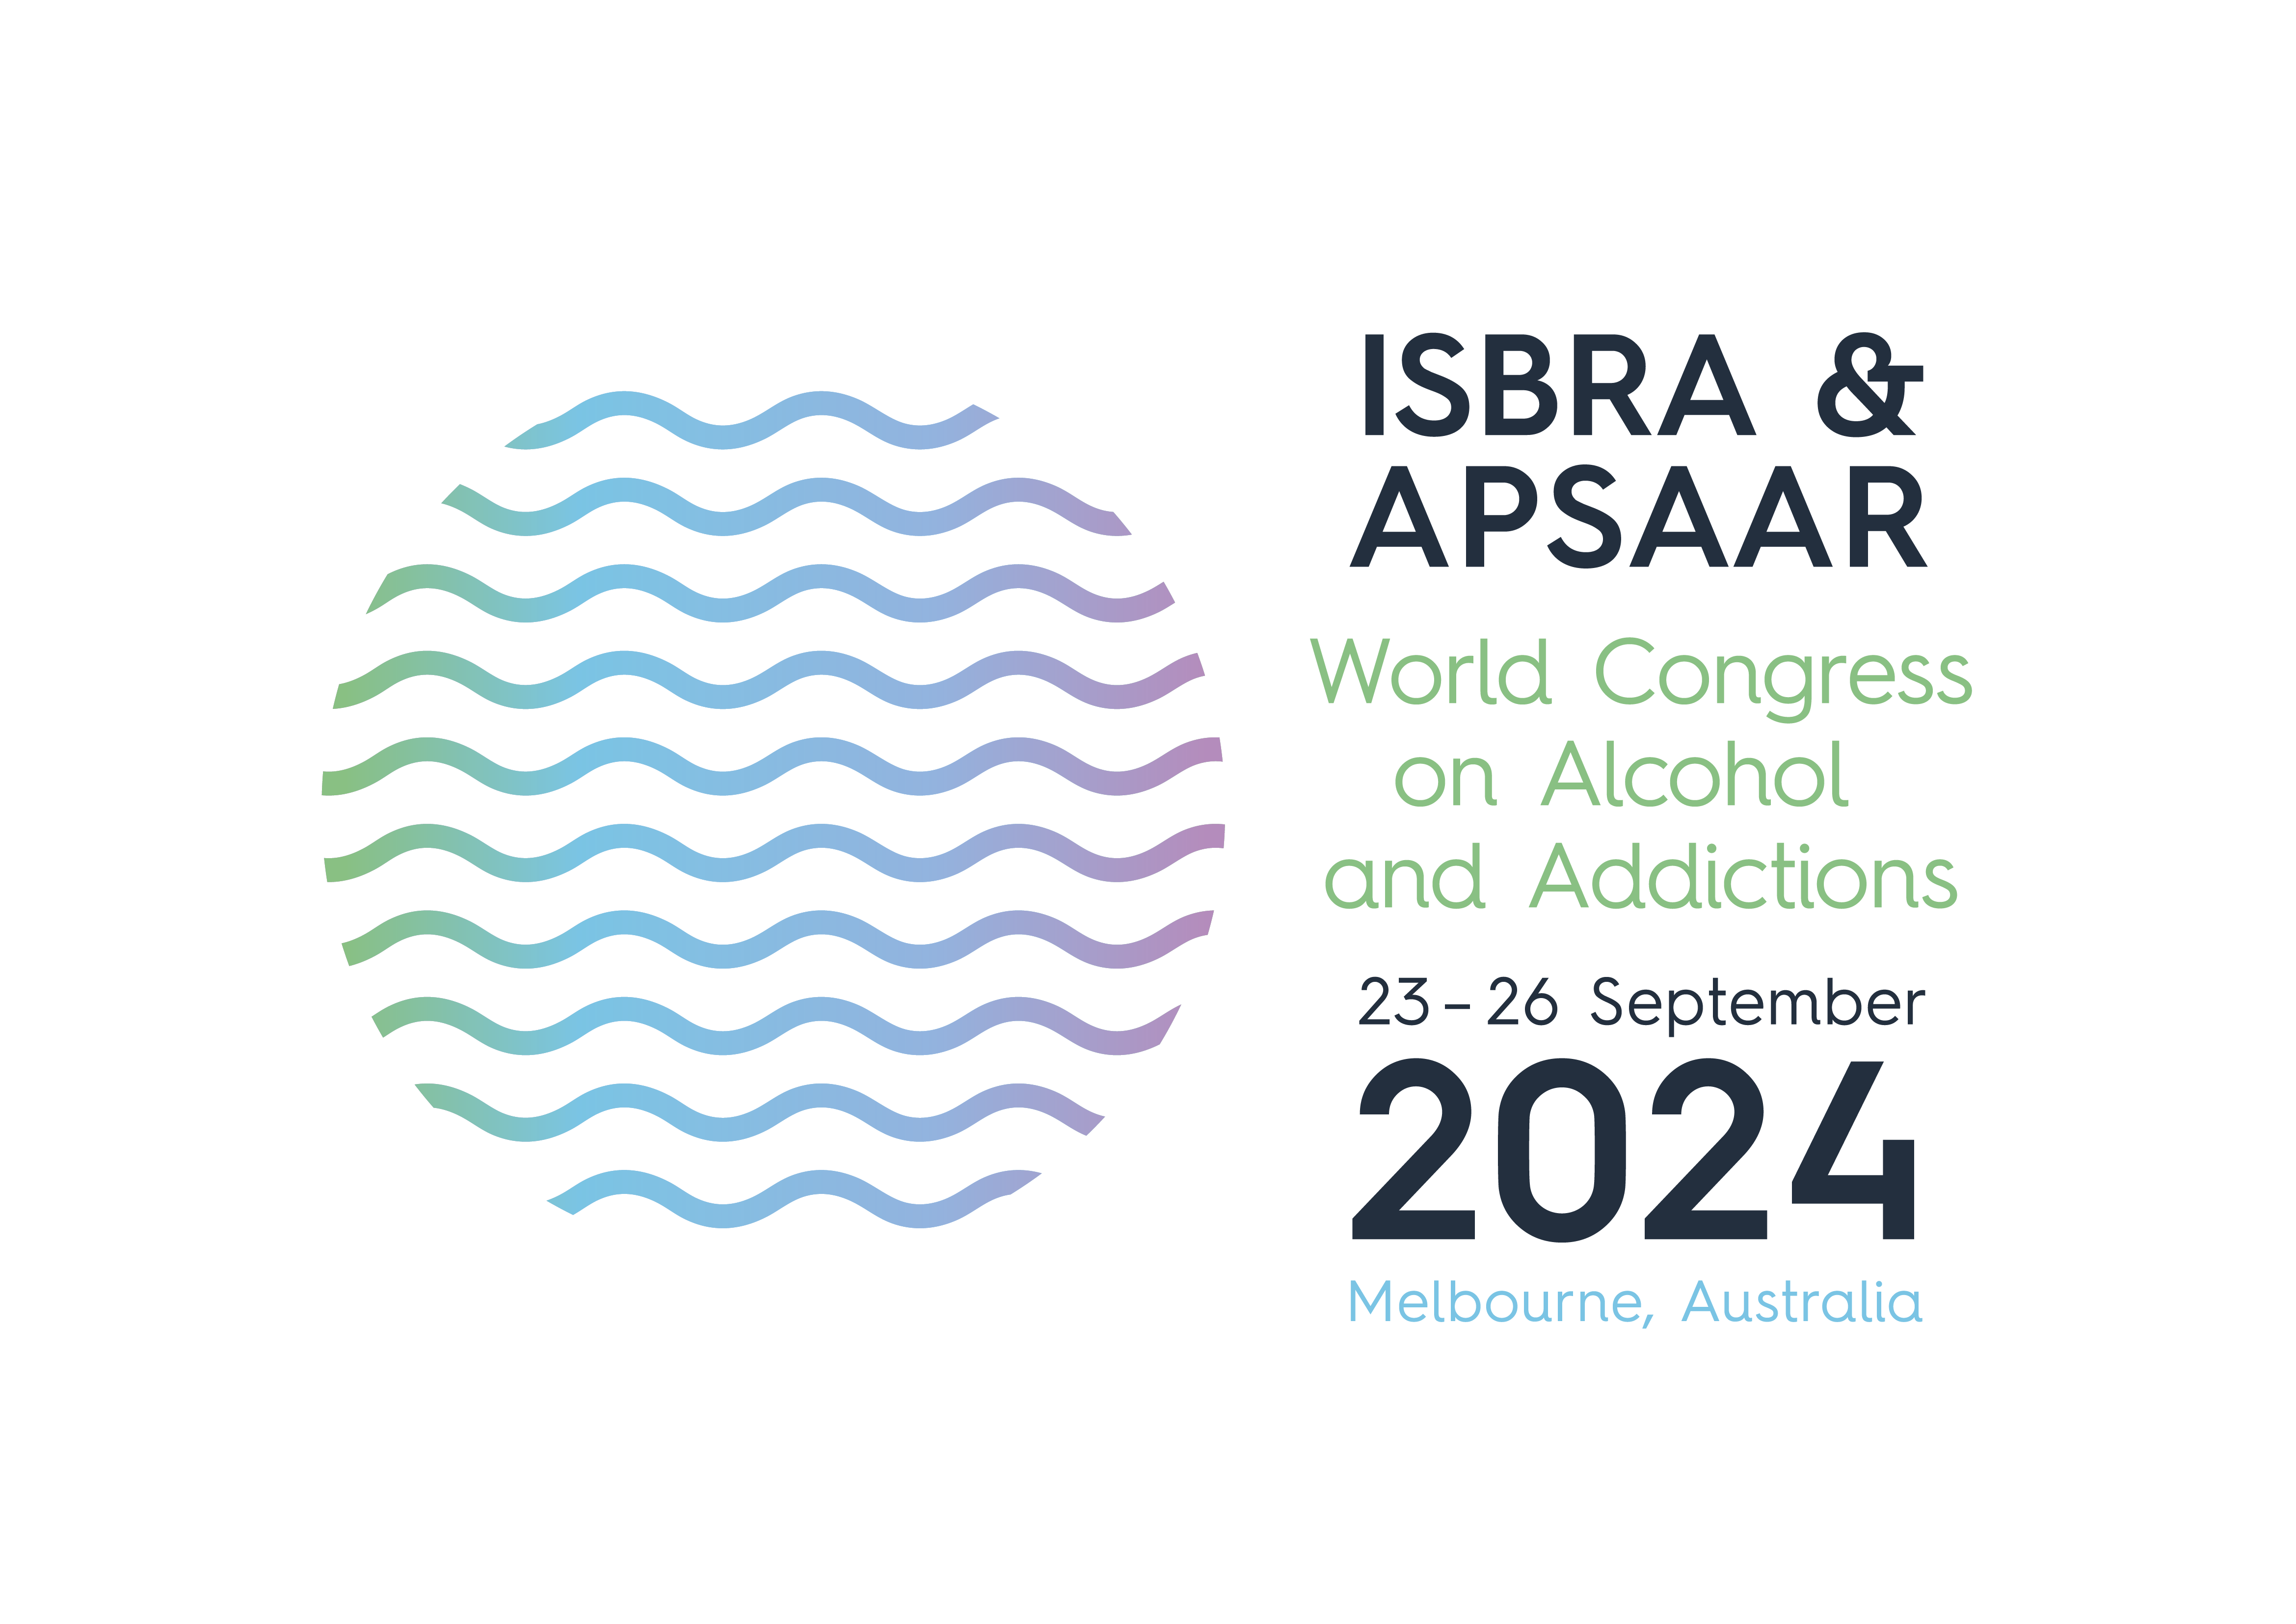 World Congress on Alcohol and Addictions